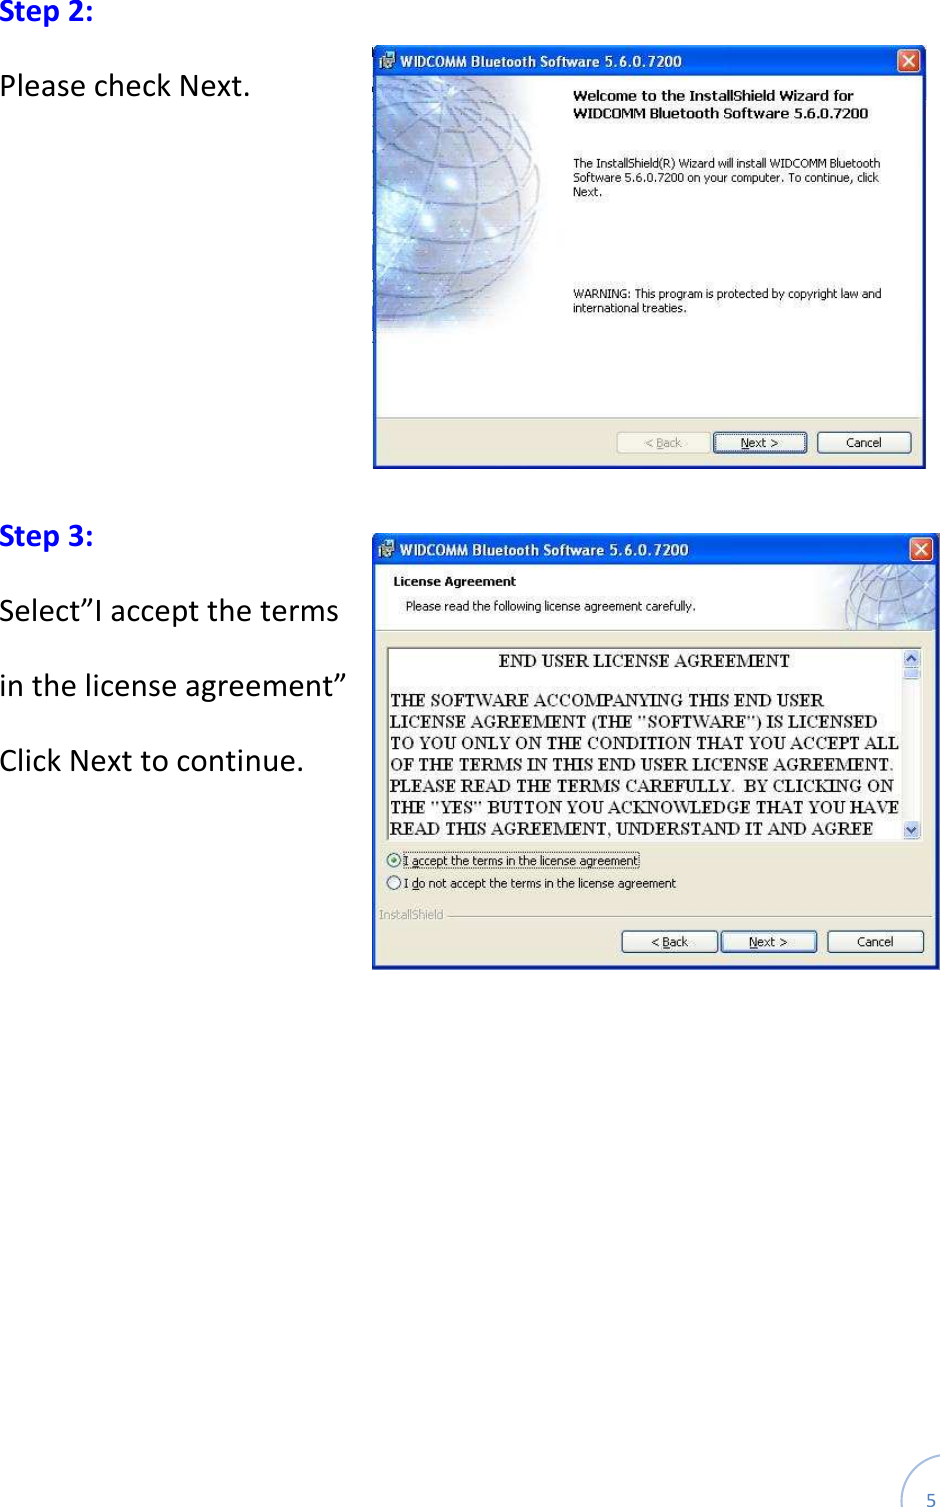  5 Step 2: Please check Next.      Step 3: Select”I accept the terms in the license agreement” Click Next to continue.    